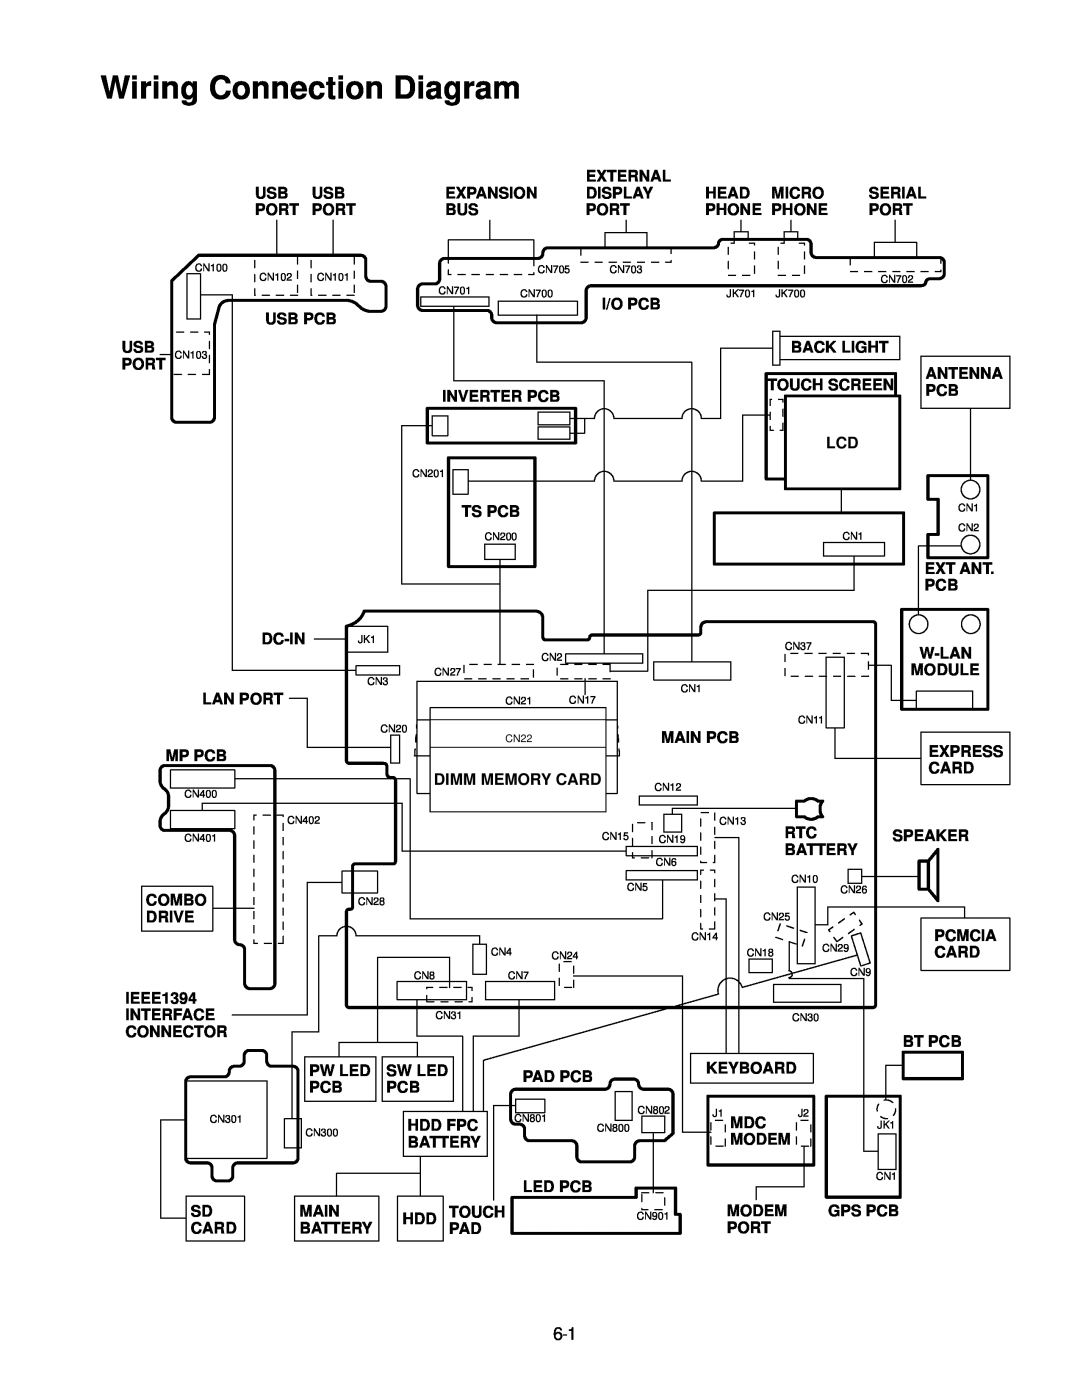 Philips CF-30FTSAZAM service manual Wiring Connection Diagram 